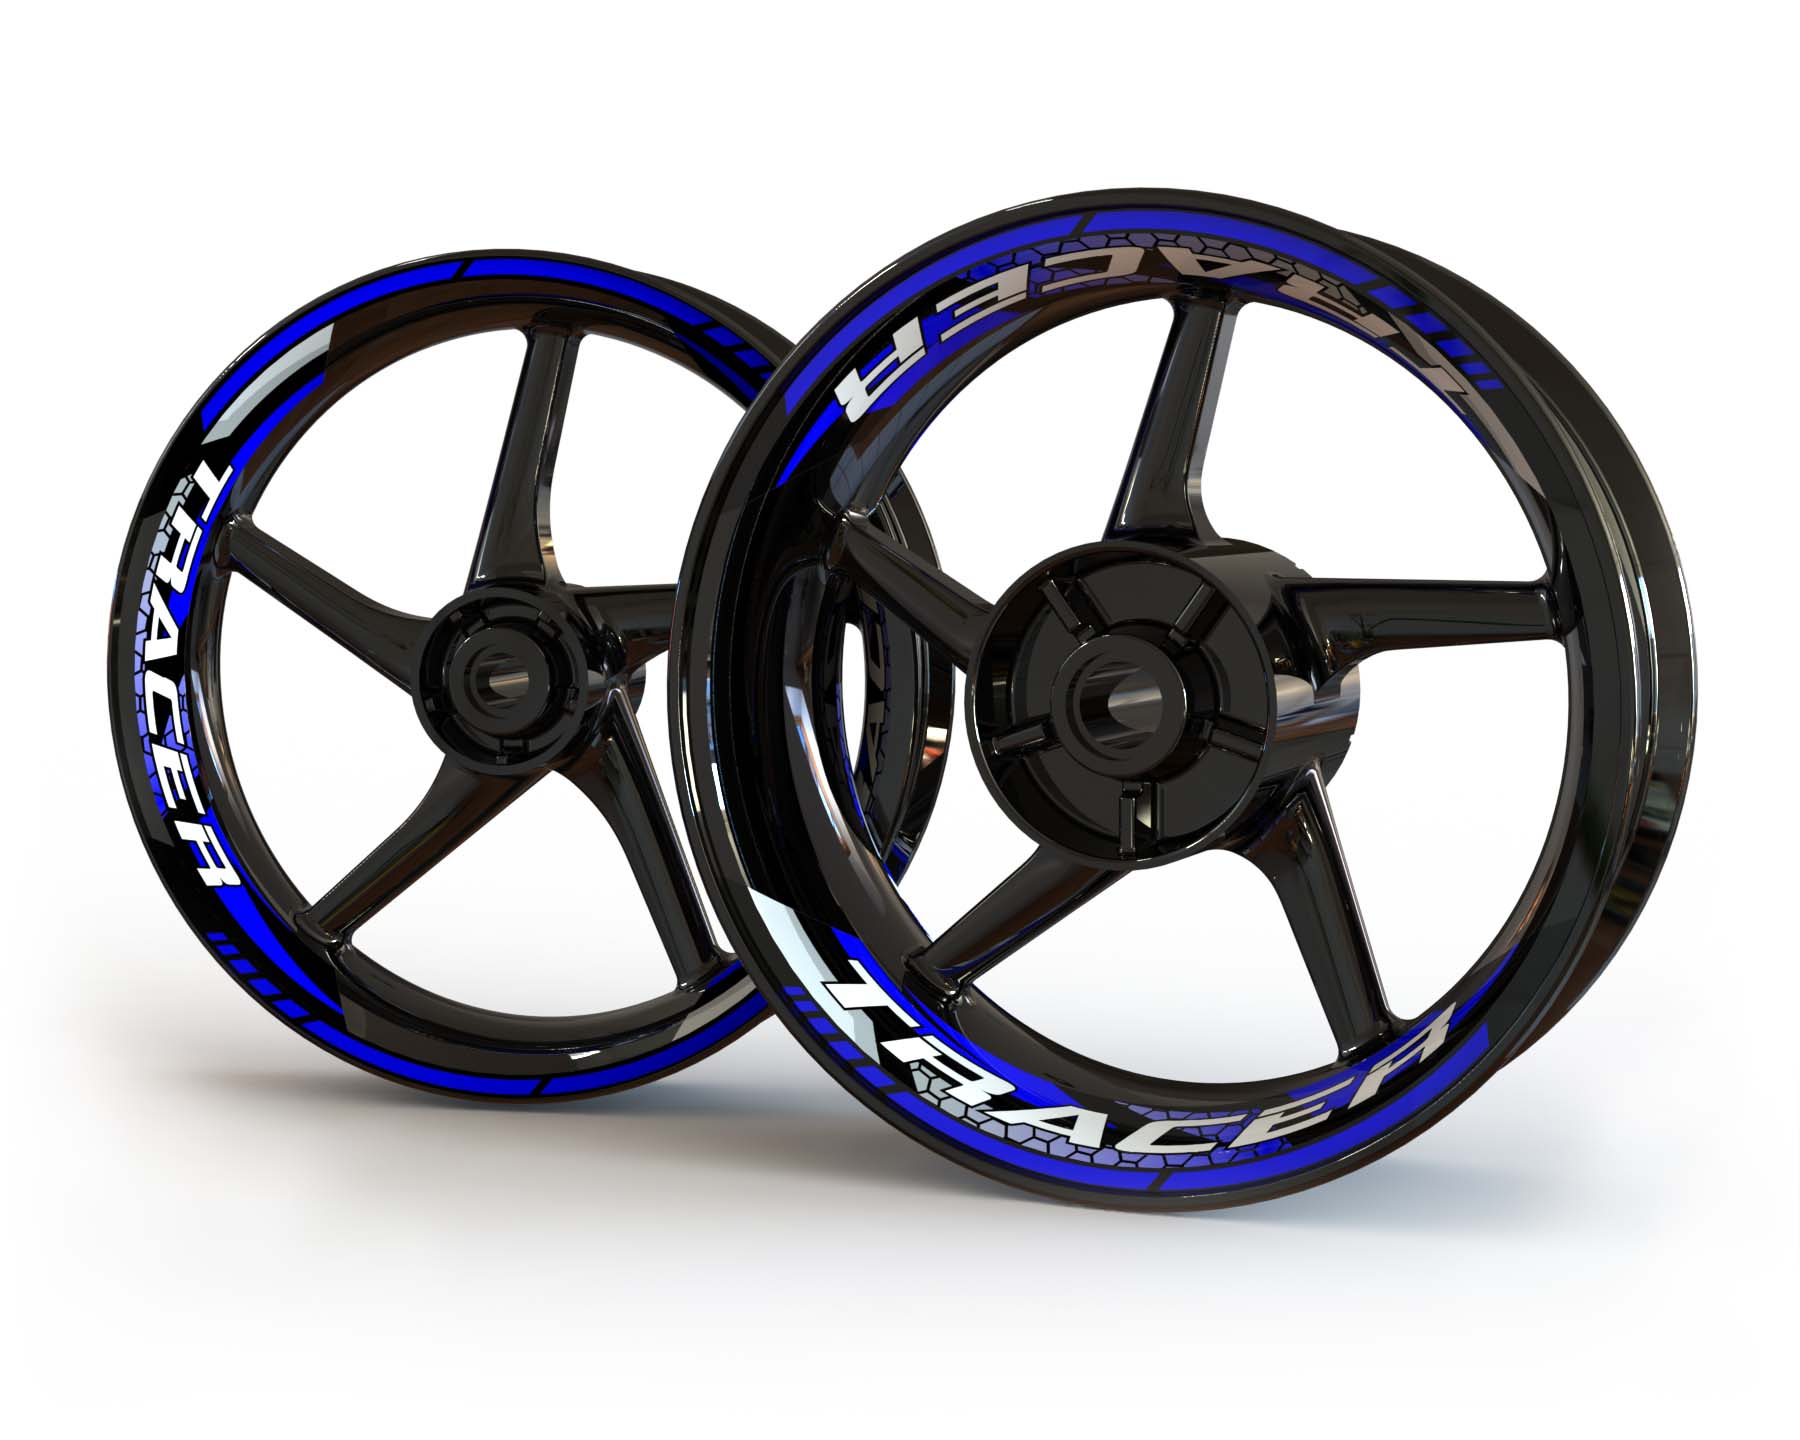 Yamaha Tracer Wheel Stickers - Two Piece Design